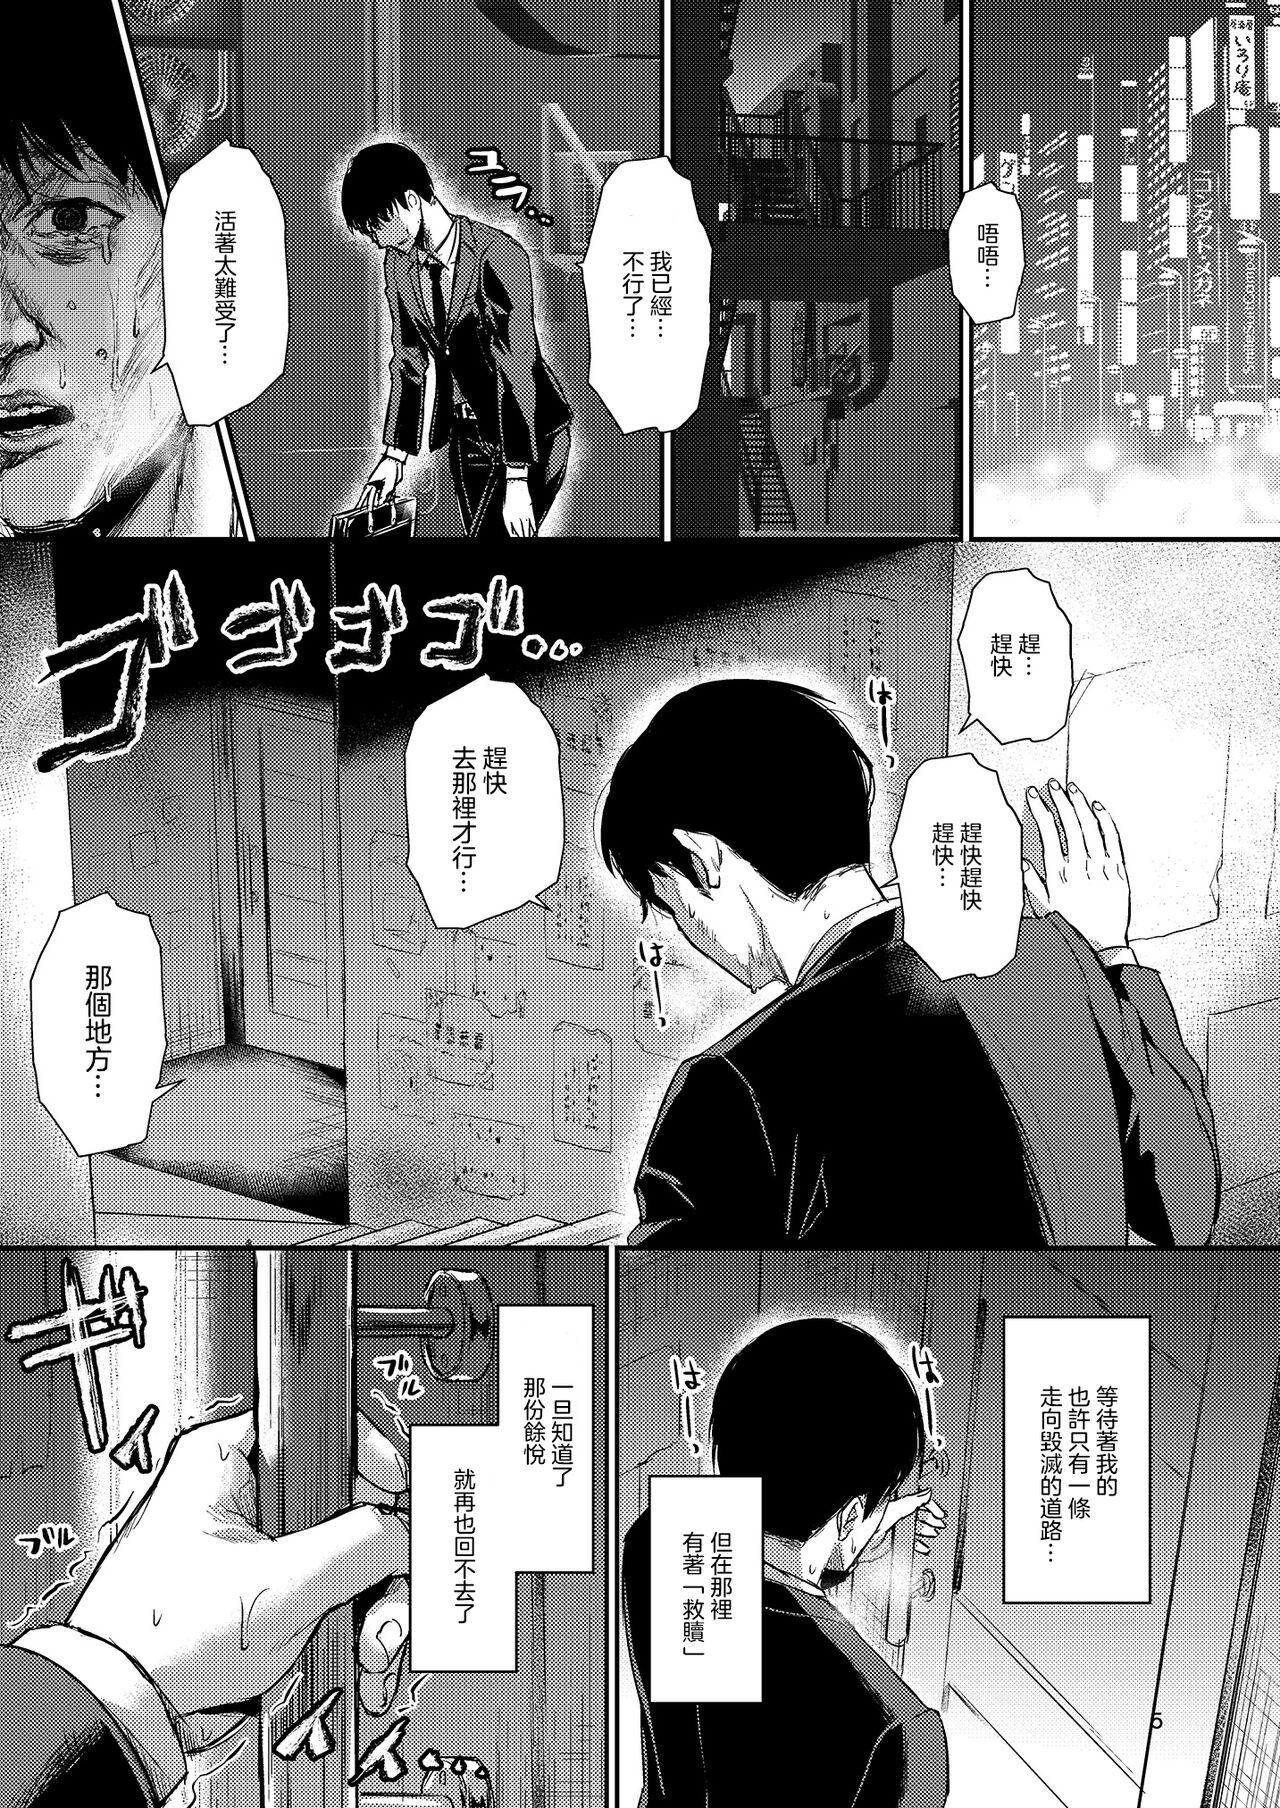 Behind Homehome Home e Youkoso! - Welcome to Home Home Home! | 歡迎來到誇誇屋！ Free Fucking - Page 6